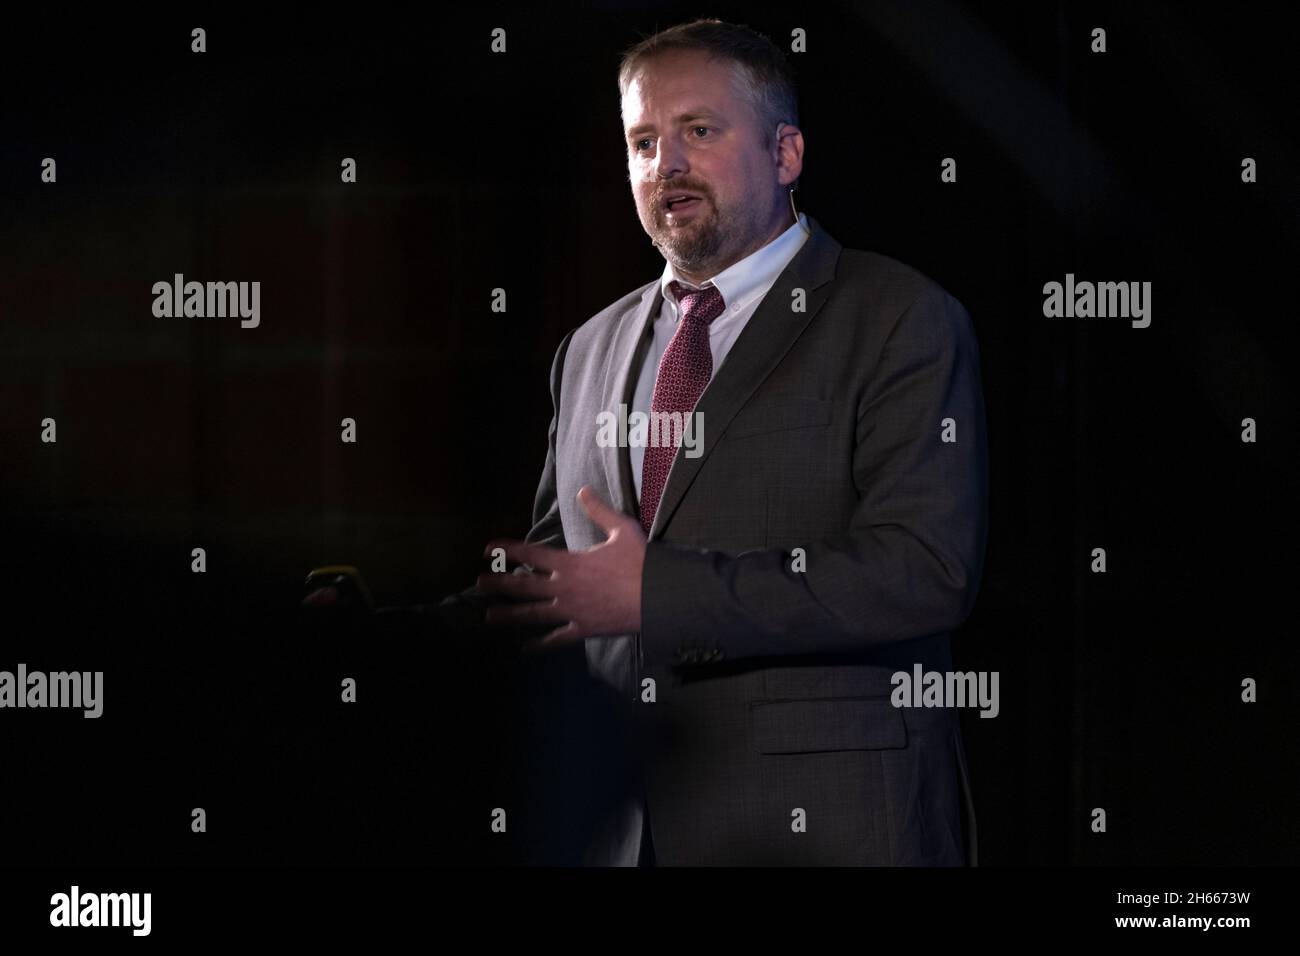 Barcelona, Spain. 12th Nov, 2021. Mr. Vit Jedlicka, President of Liberland speaks during the conference.In the annual framework of Democracy4All, Blockchain For Governance has taken place at Casa Llotja de Mar in Barcelona with conferences focused on the development and implementation of blockchain technology. (Photo by Paco Freire/SOPA Images/Sipa USA) Credit: Sipa USA/Alamy Live News Stock Photo